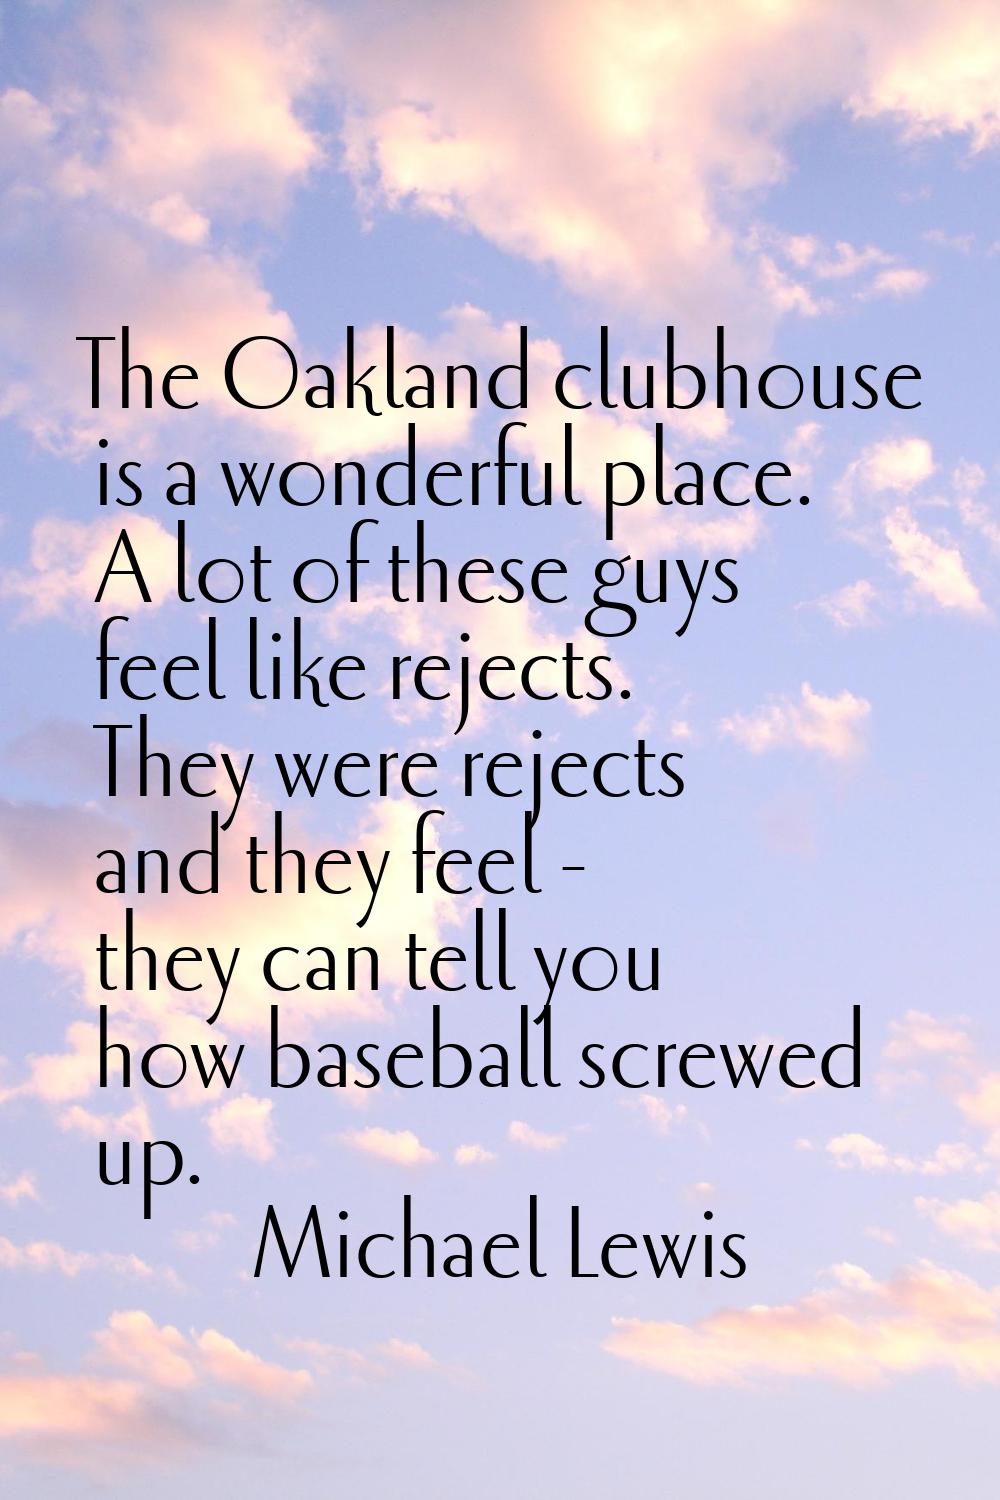 The Oakland clubhouse is a wonderful place. A lot of these guys feel like rejects. They were reject